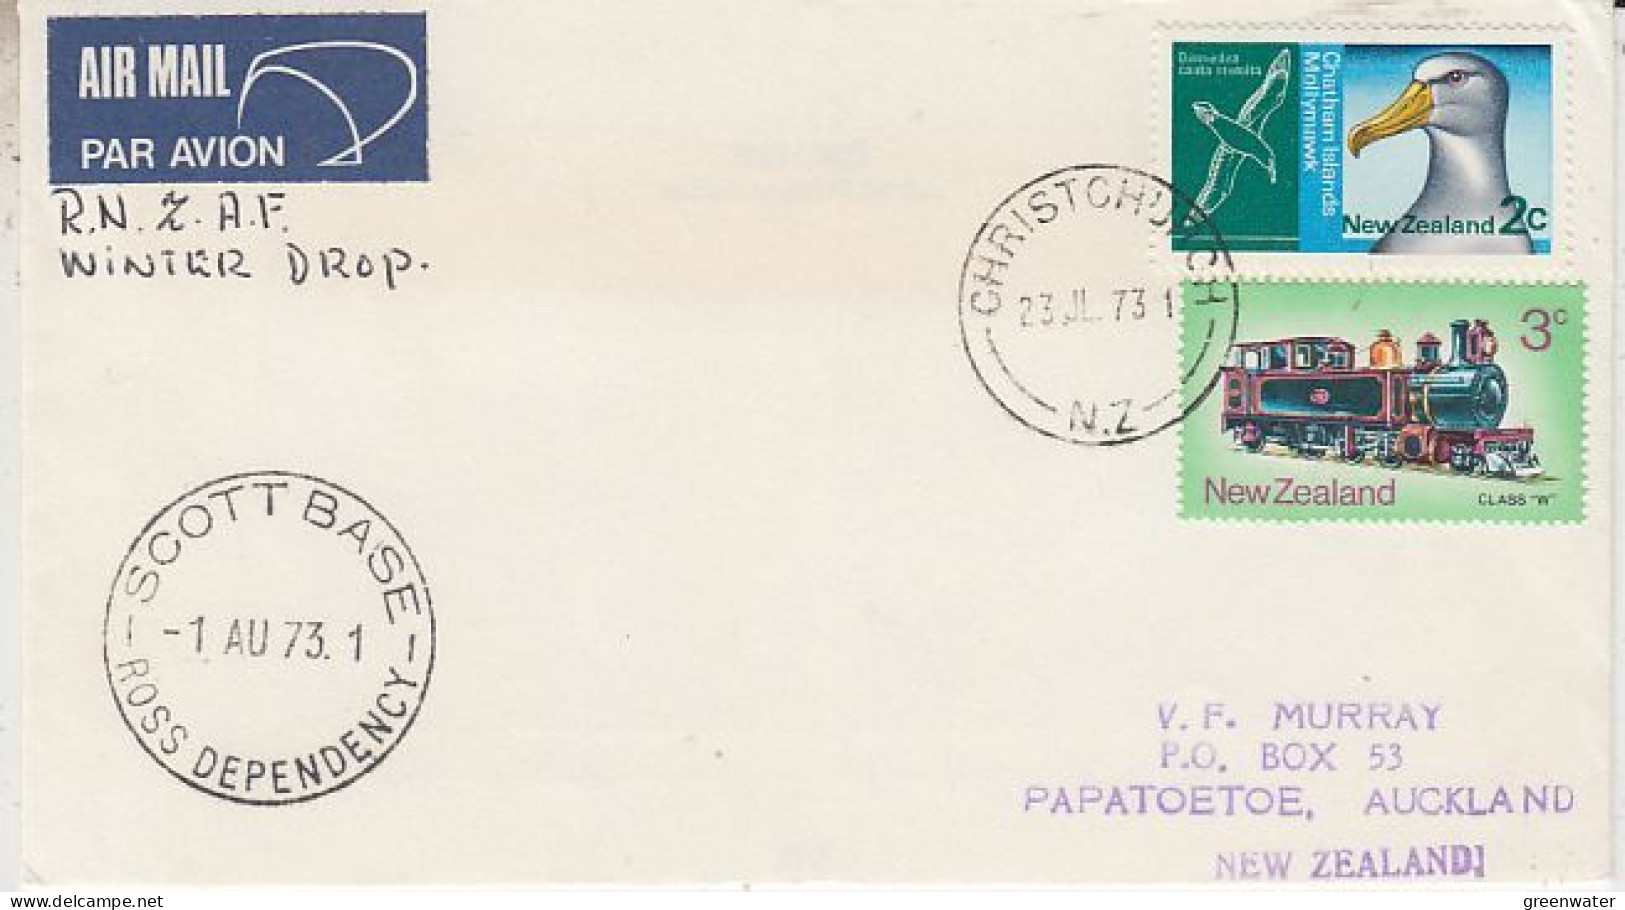 Ross Dependency RNZAF Winter Drop Ca Scott Base 1 AUG 1973 (RO202) - Covers & Documents